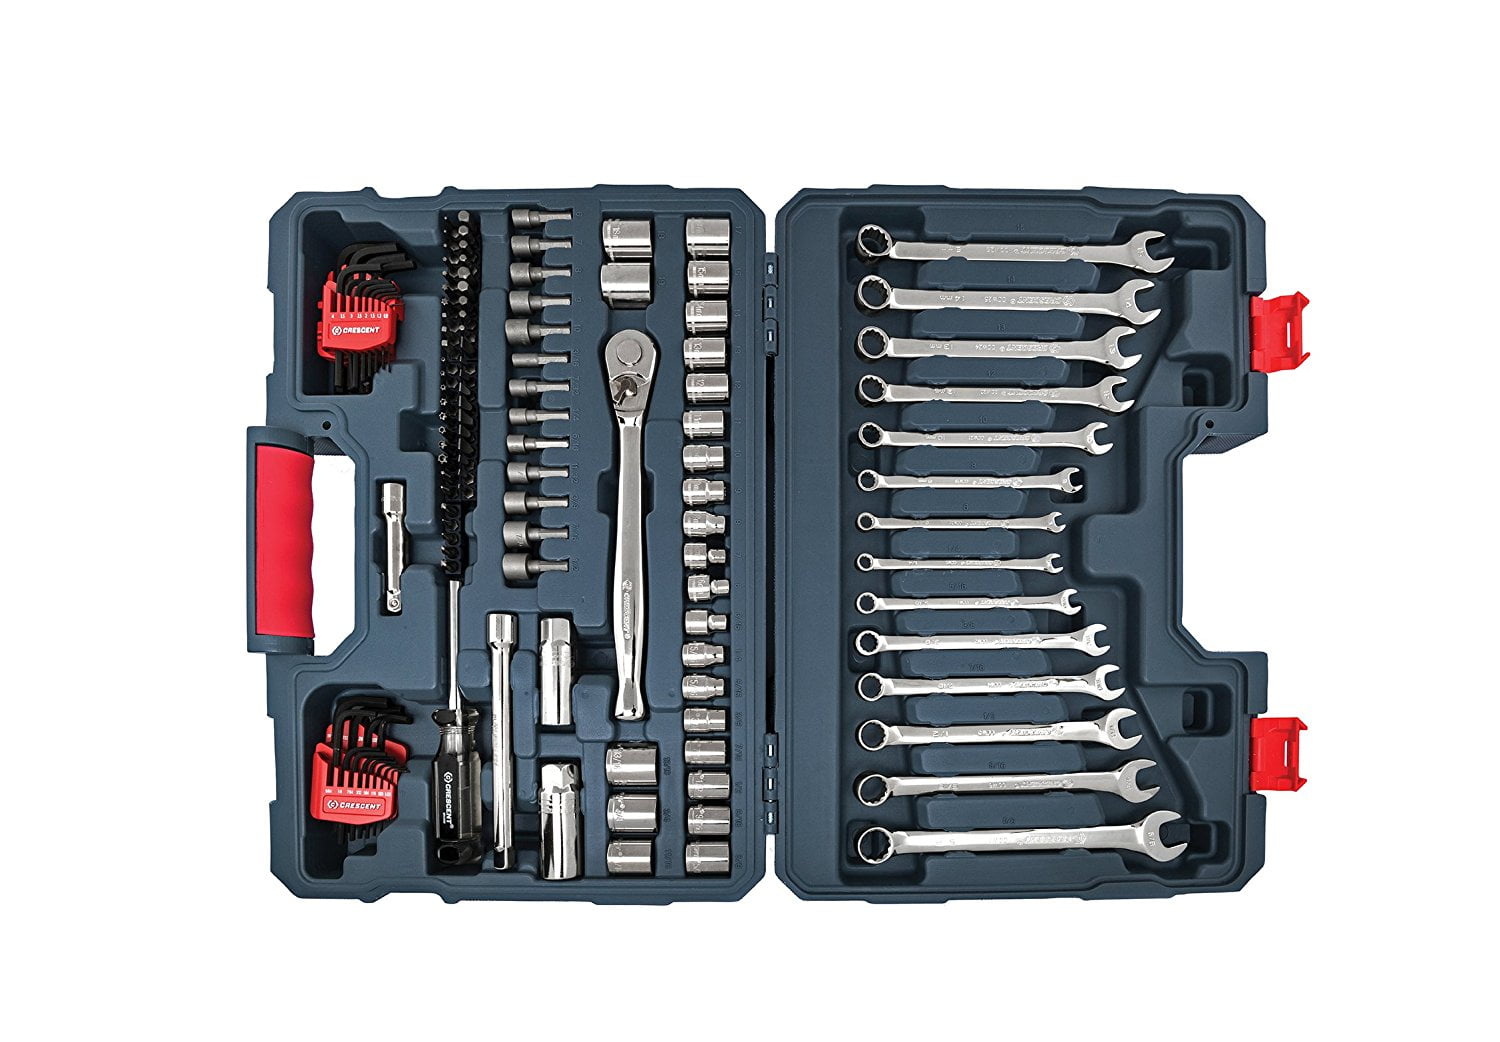 UpTo 24 NEW at MostElectric 128 PIECE CRESCENT MECHANIC 3/8 TOOL SET 